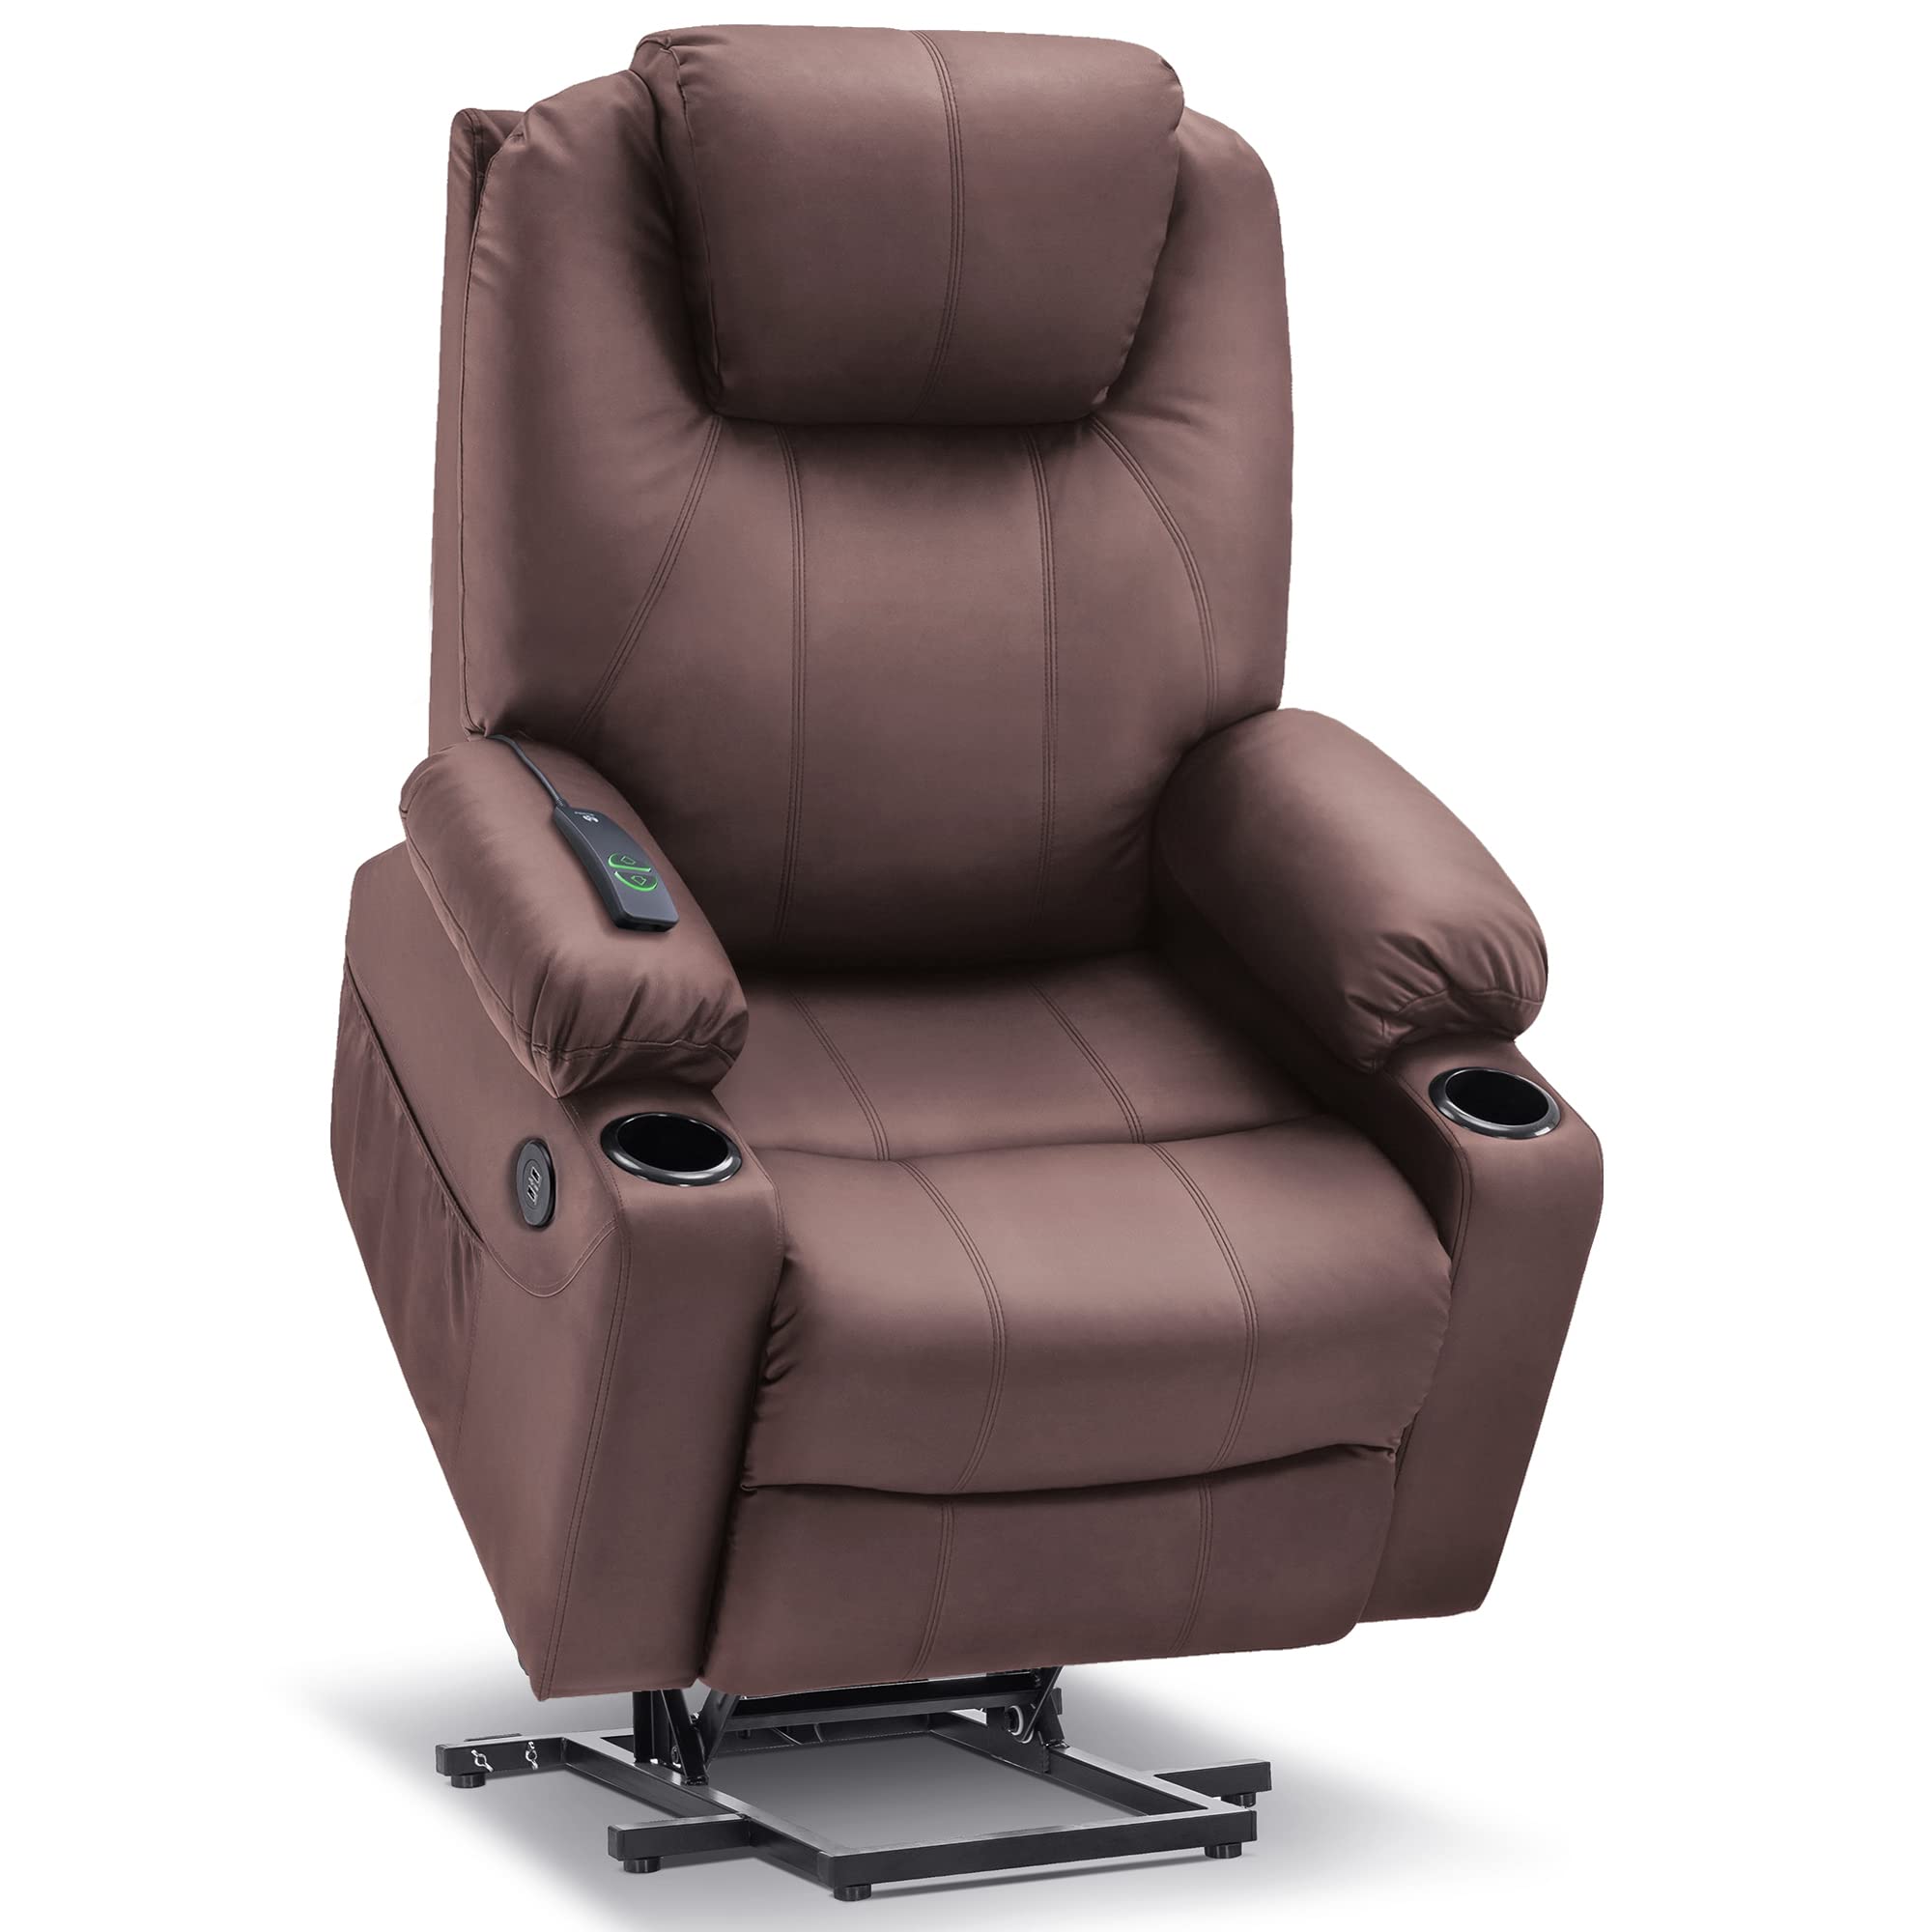 Best Riser Recliners Chairs MCombo Large Power Lift Recliner Chair Sofa with Massage and Heat for Big and Tall Elderly People, 3 Positions, Cup Holders, and USB Ports, Extended Footrest, Faux Leather 7516 (Large, Light Brown)